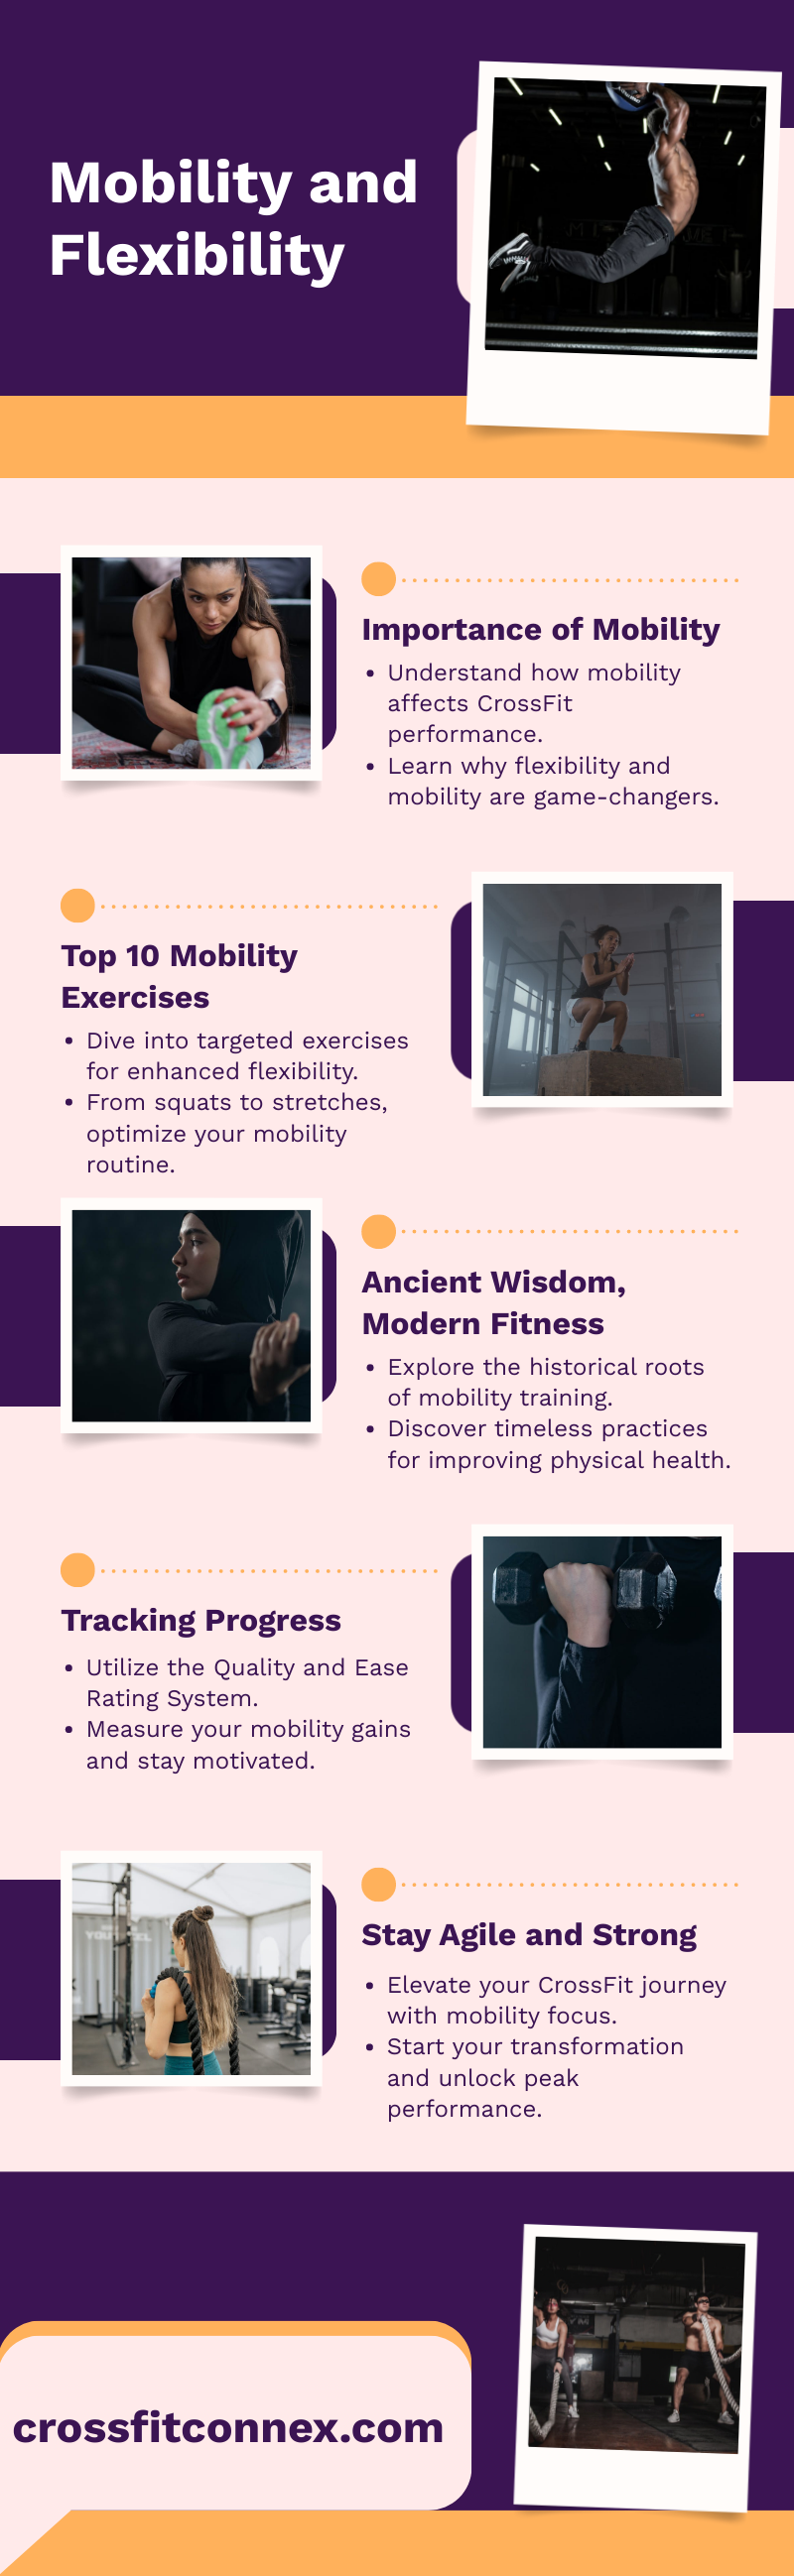 Infographic about CrossFit Mobility and Flexibility Exercises